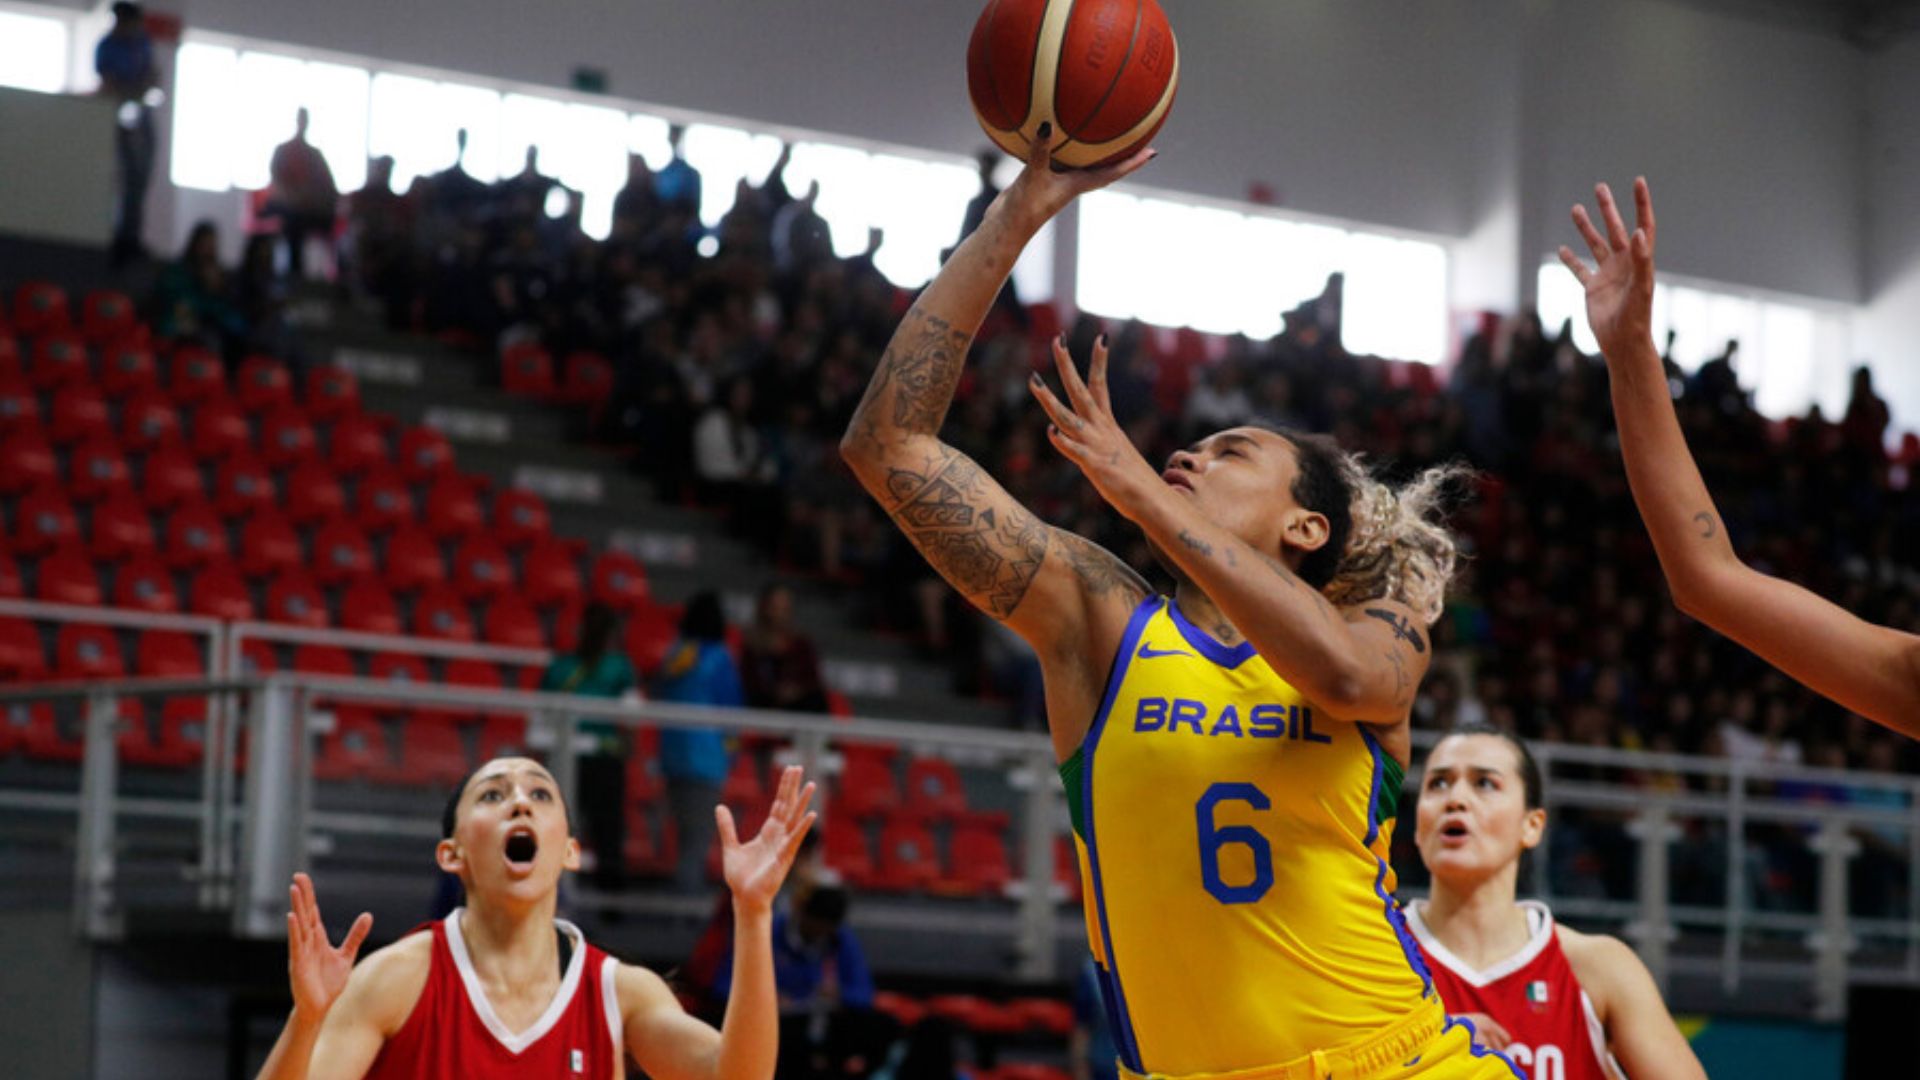 Female's Basketball: Brazil Debuts with a Convincing Victory over Mexico